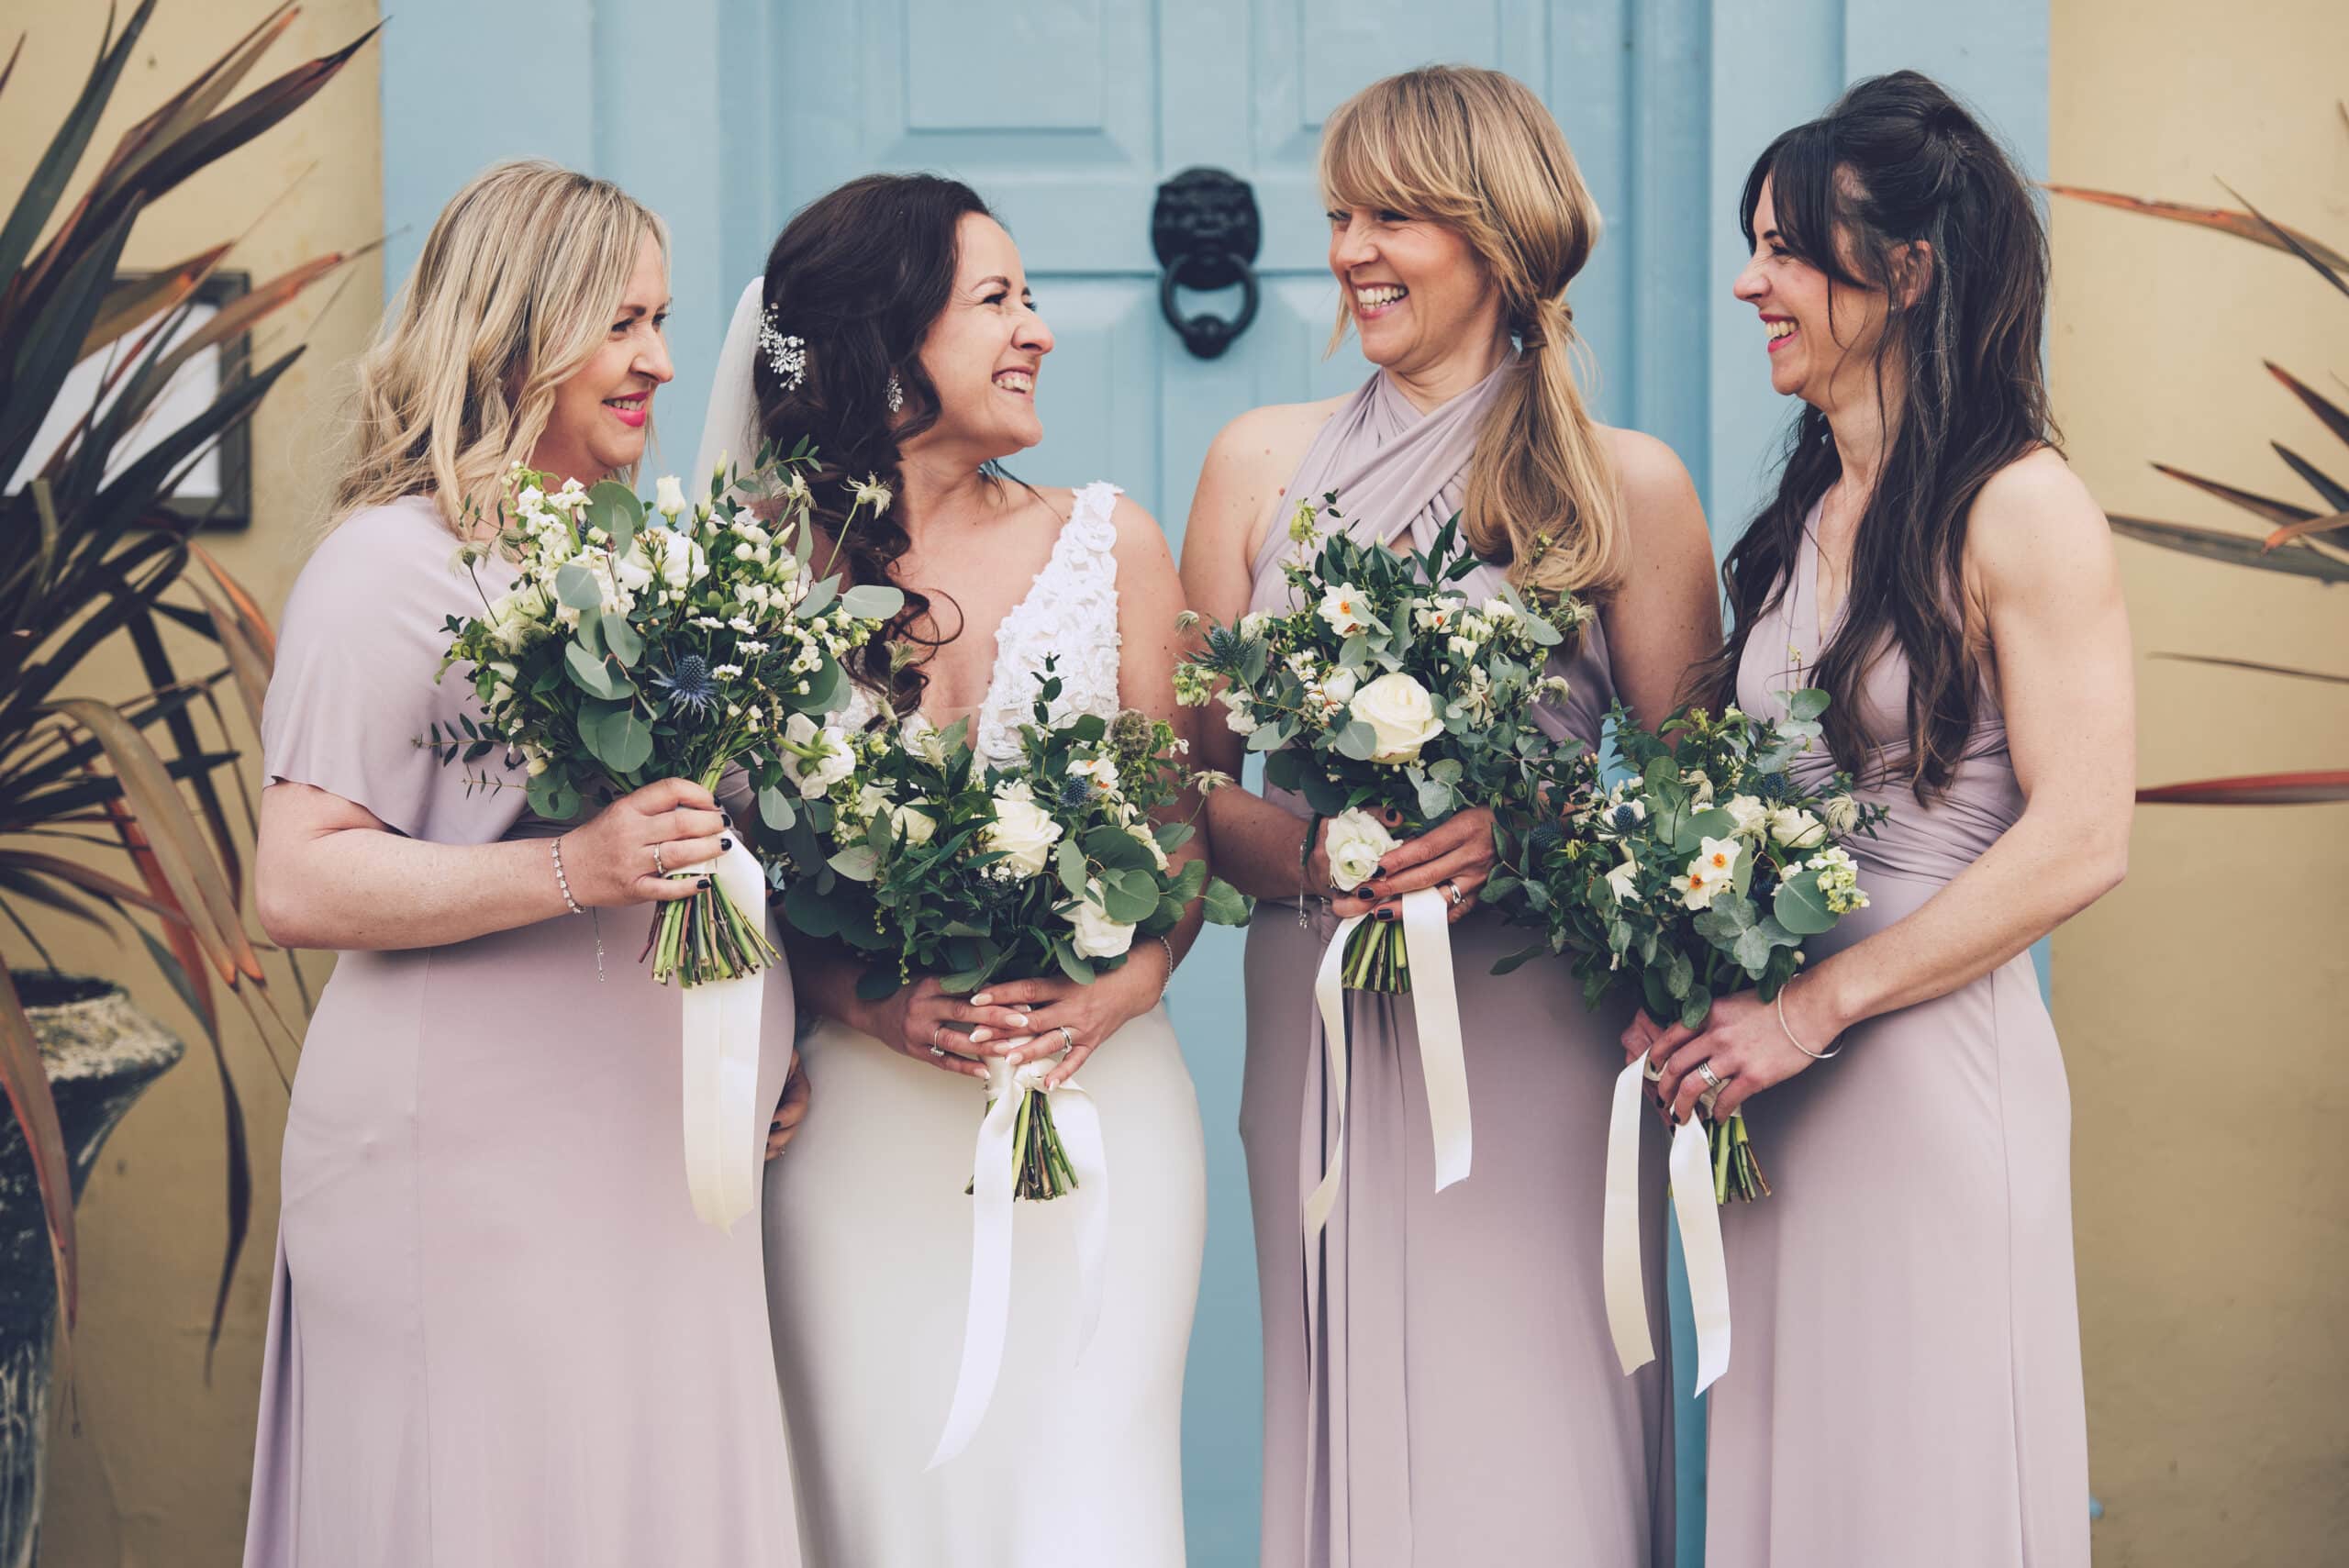 Bride and Bridesmaids on wedding day